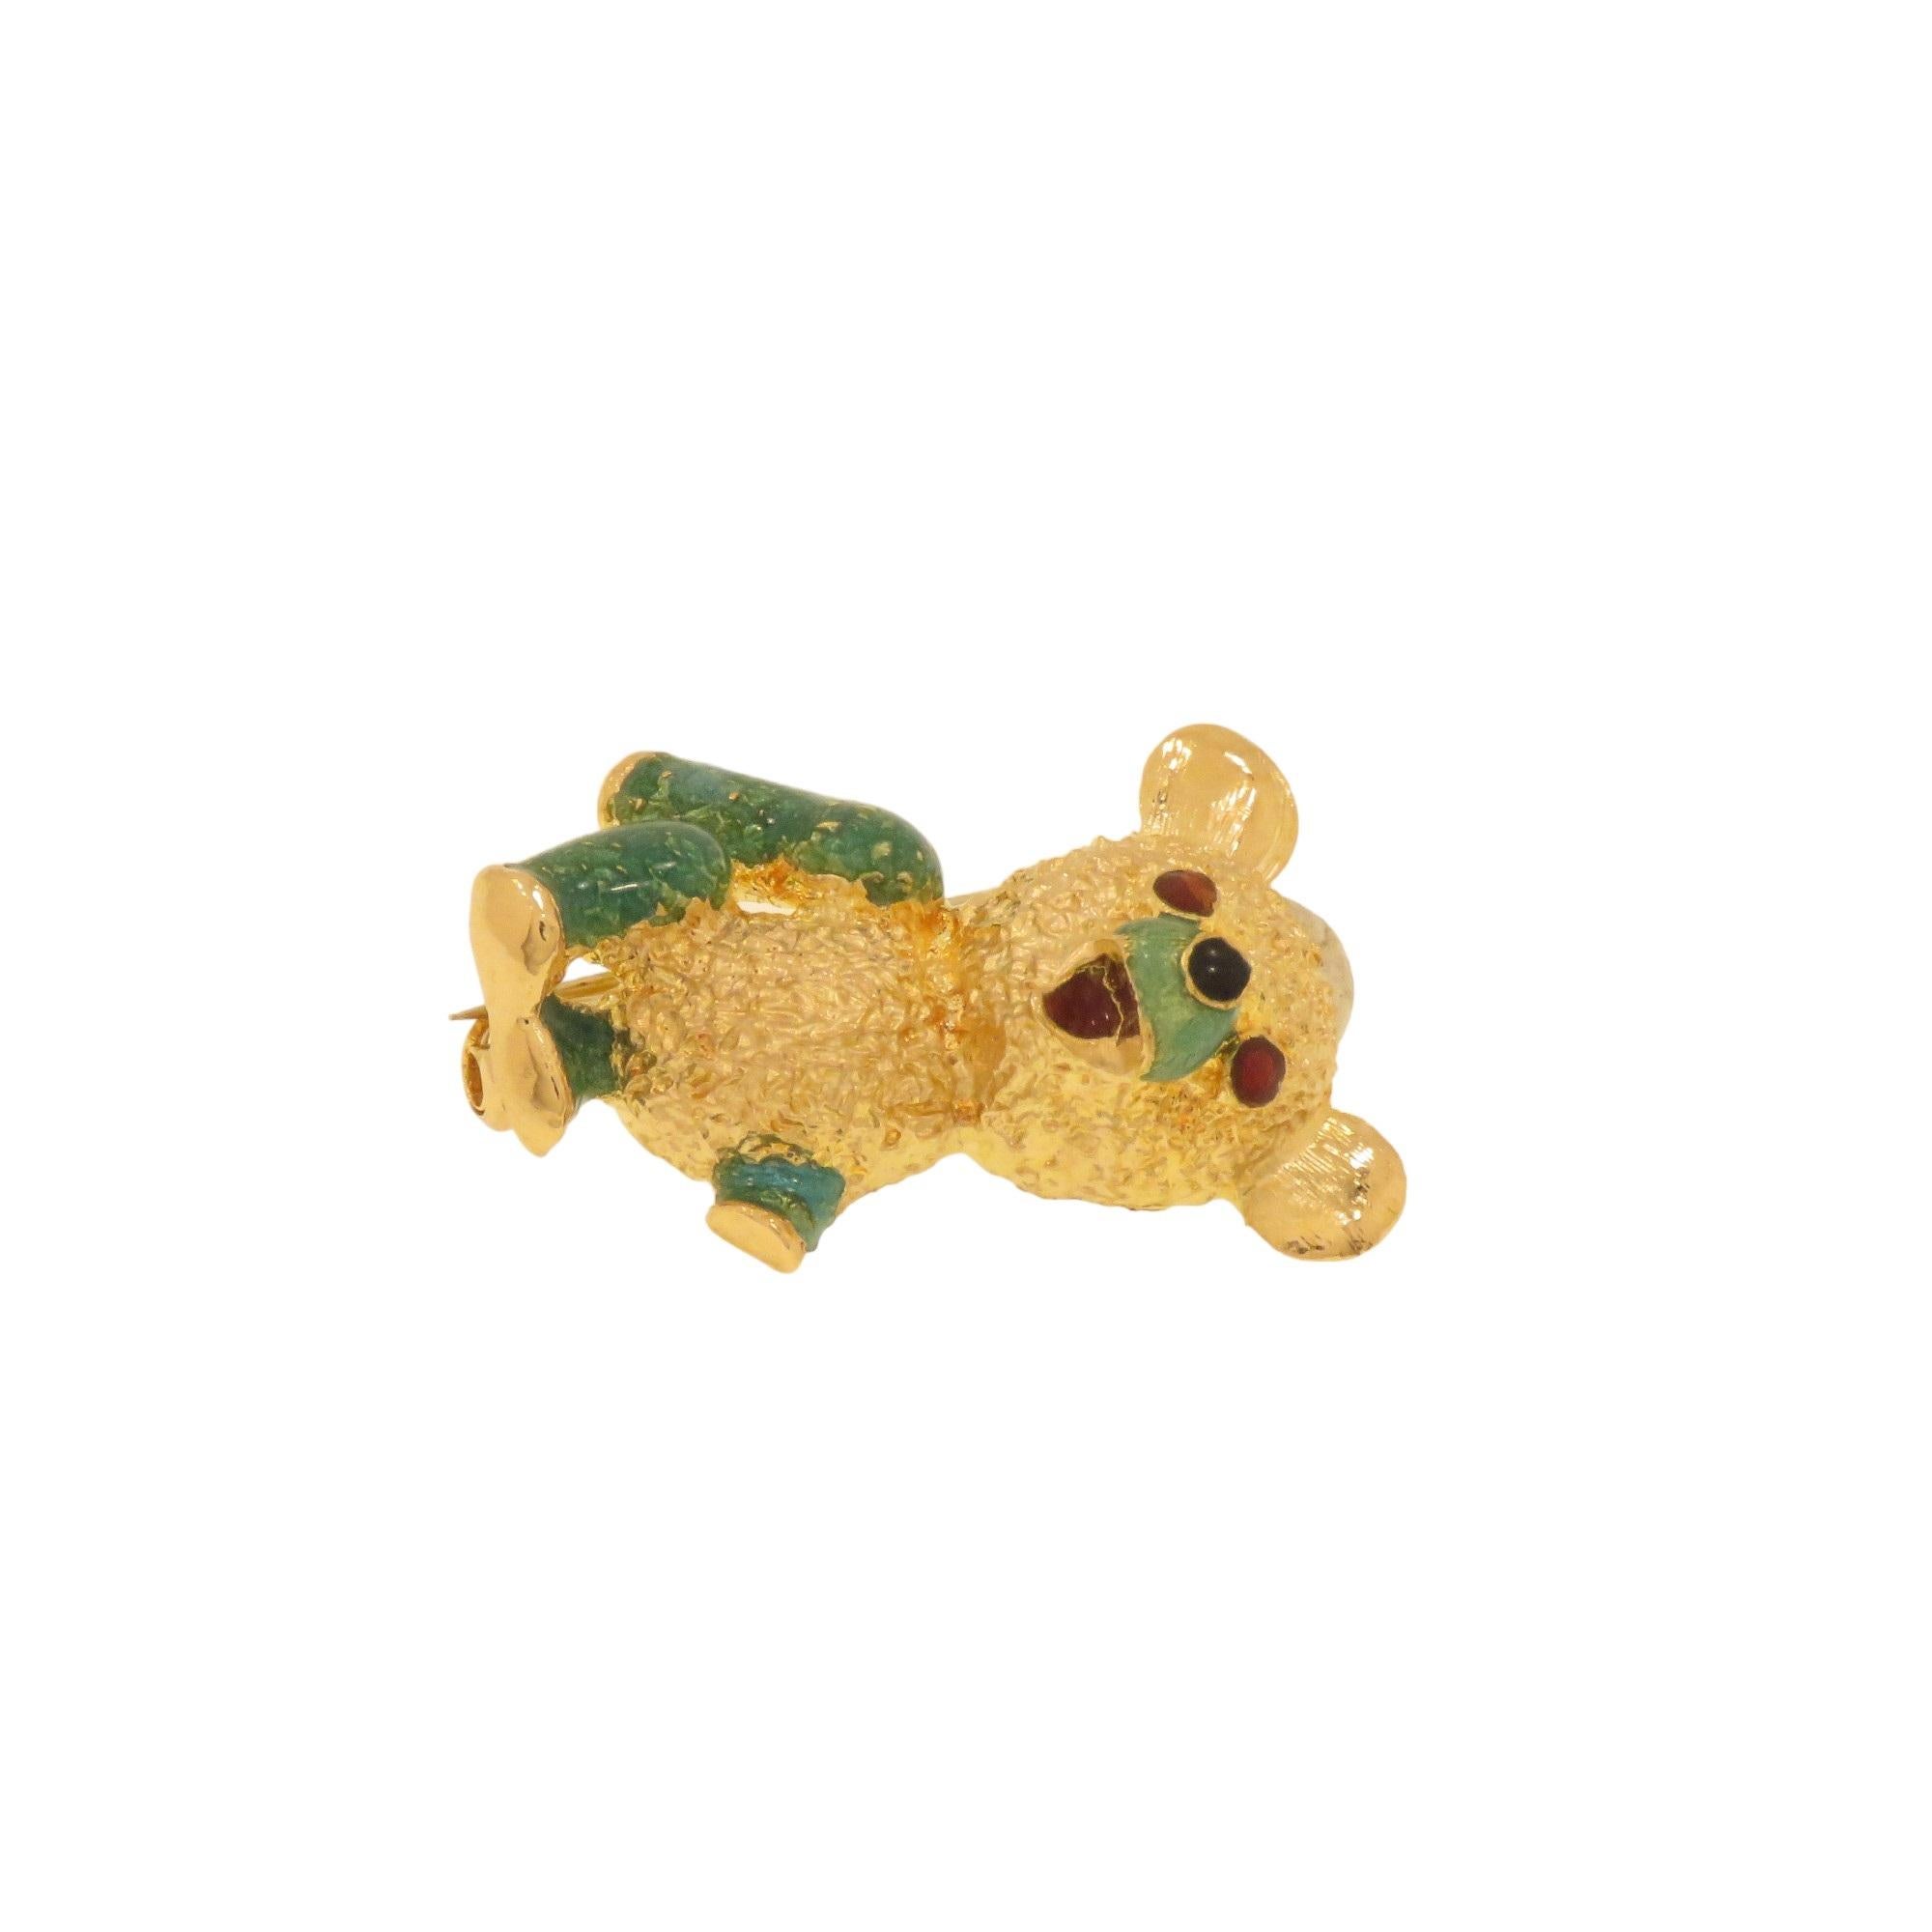 Pretty brooch depicting a teddy bear handmade in 18K gold between 1960 and 1970. Attention to mini details, The body is hand-engraved and the paws, muzzle and eyes are fire enameled. The measurements of the brooch are 26x20 mm / 1.023x0.787 inches.